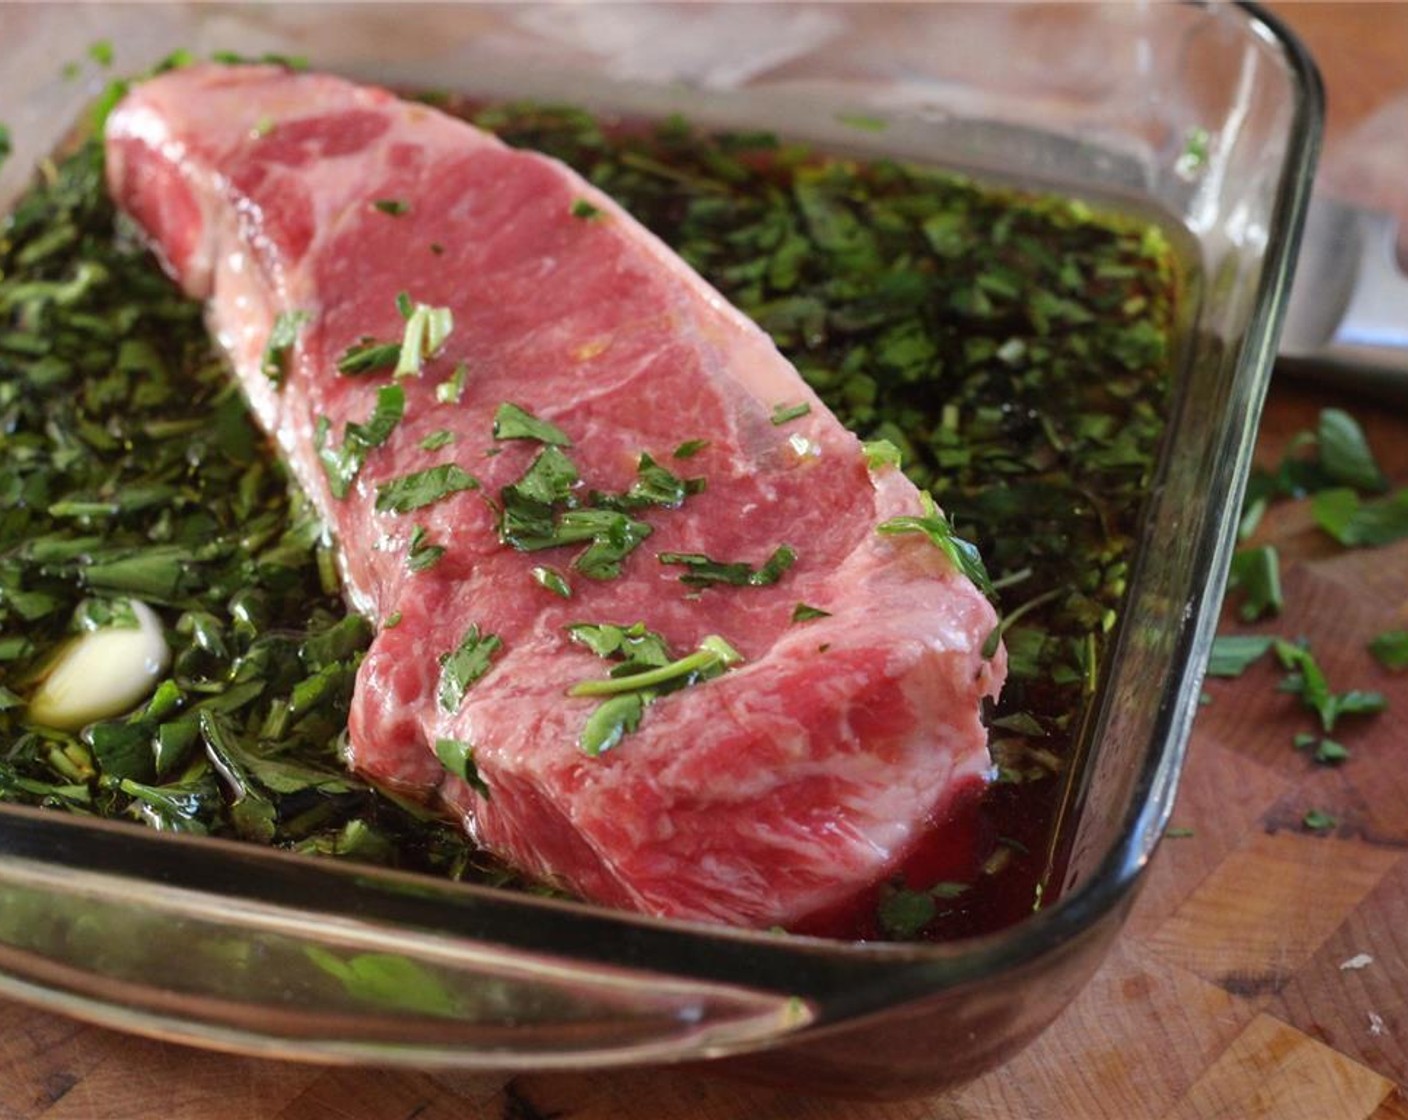 step 2 Cut the Dry-Aged Strip Steak (3 lb) into 4 steaks. Trim each of excess fat, sinew and bone. Marinate steaks in garlic, Cabernet Sauvignon (1/2 cup), Olive Oil (1 Tbsp) and parsley. Marinate for 24 hours.